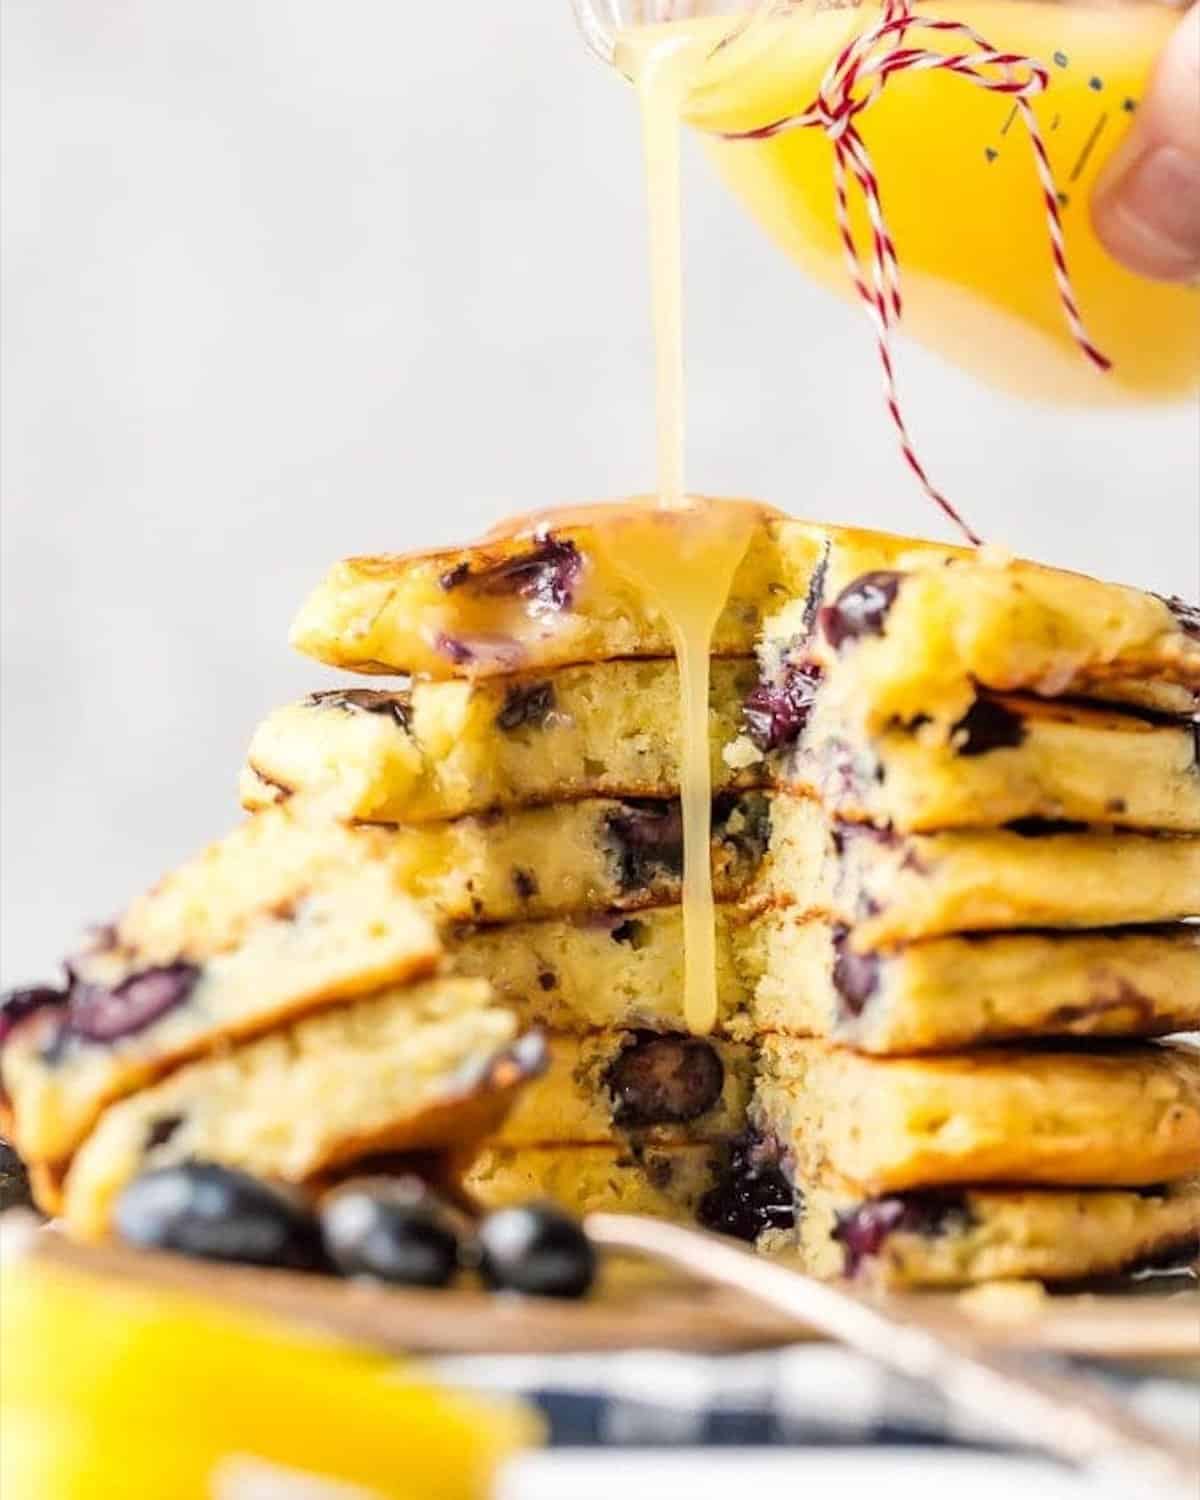 A stack of blueberry pancakes being drizzled with lemon juice and chocolate sauce.